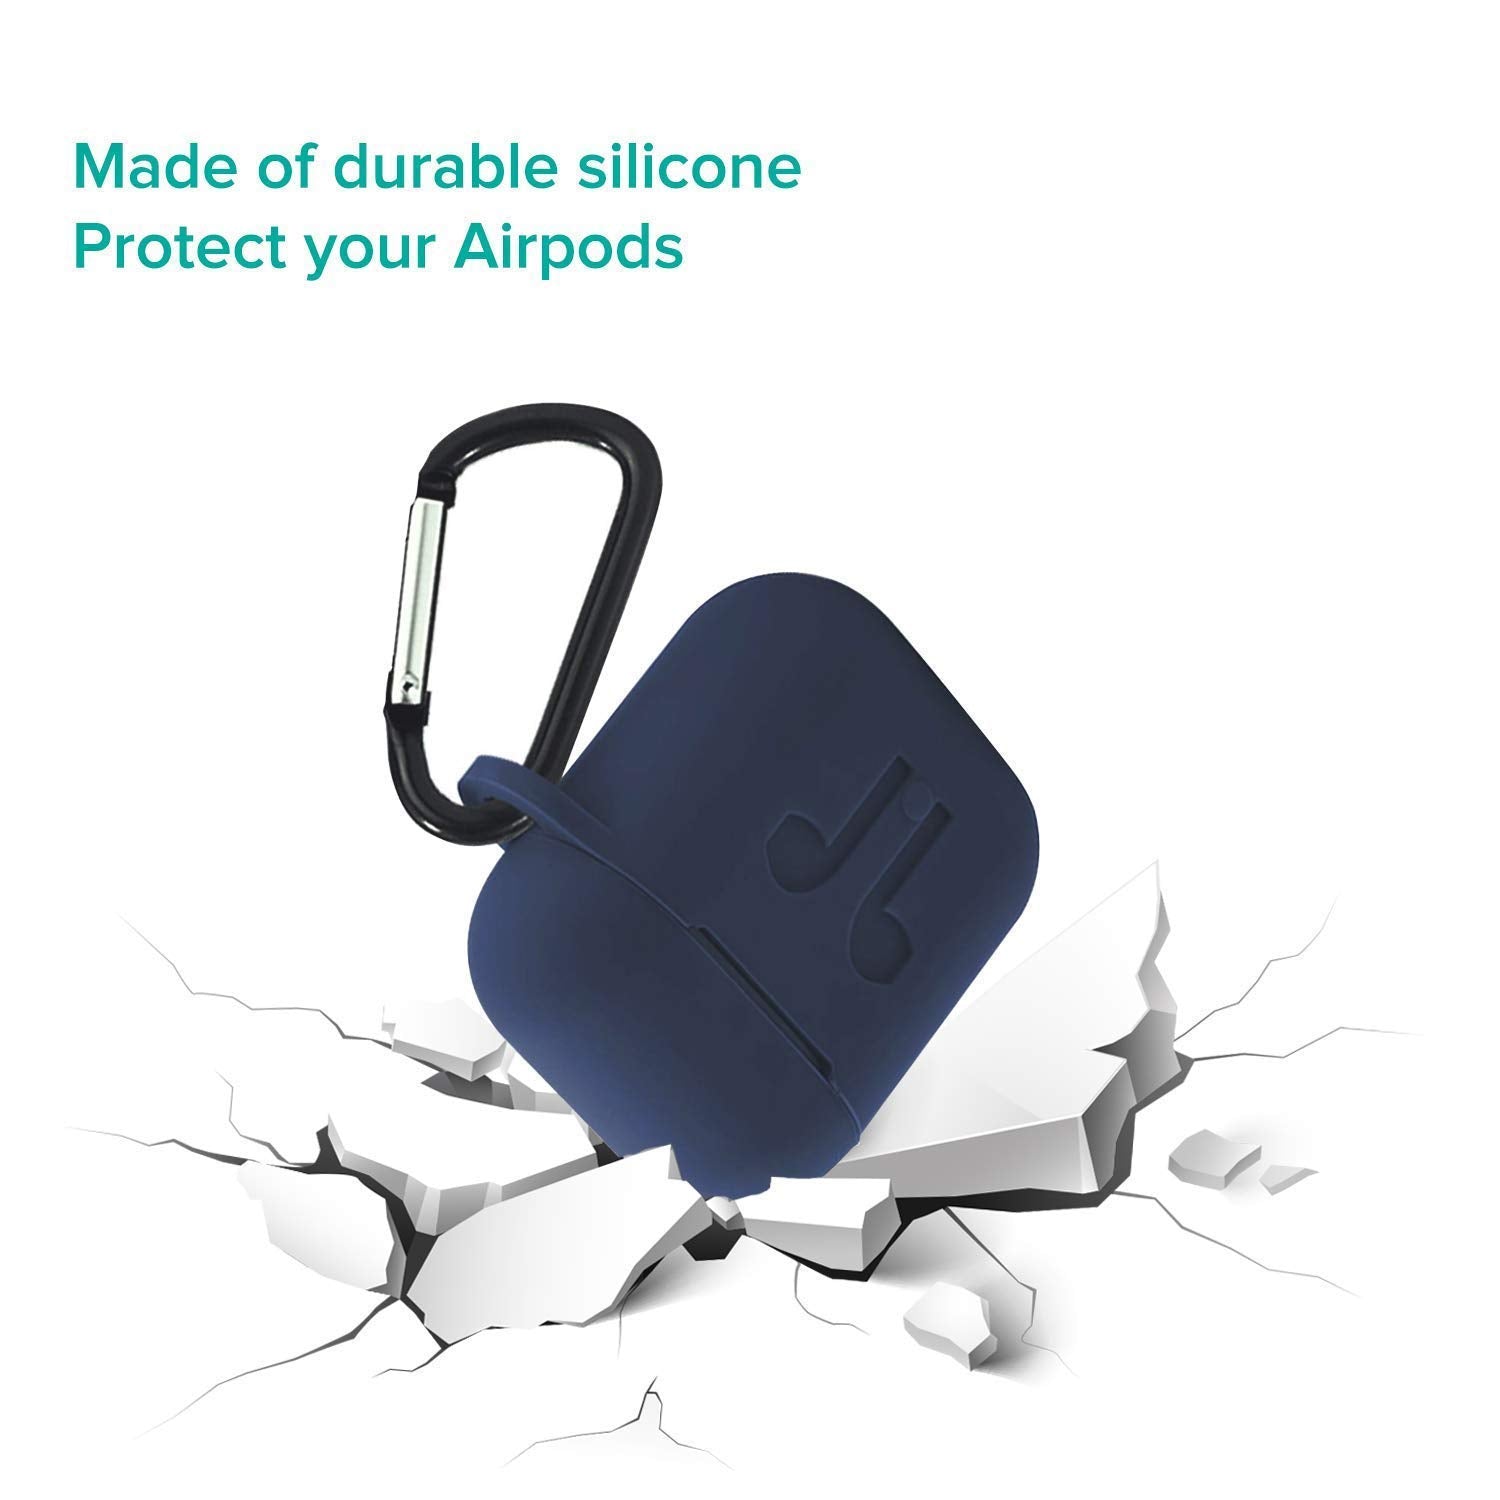 6473 Silicone Shockproof Protection Wireless Headphones Carrying Box Cover with Metal Keychain 